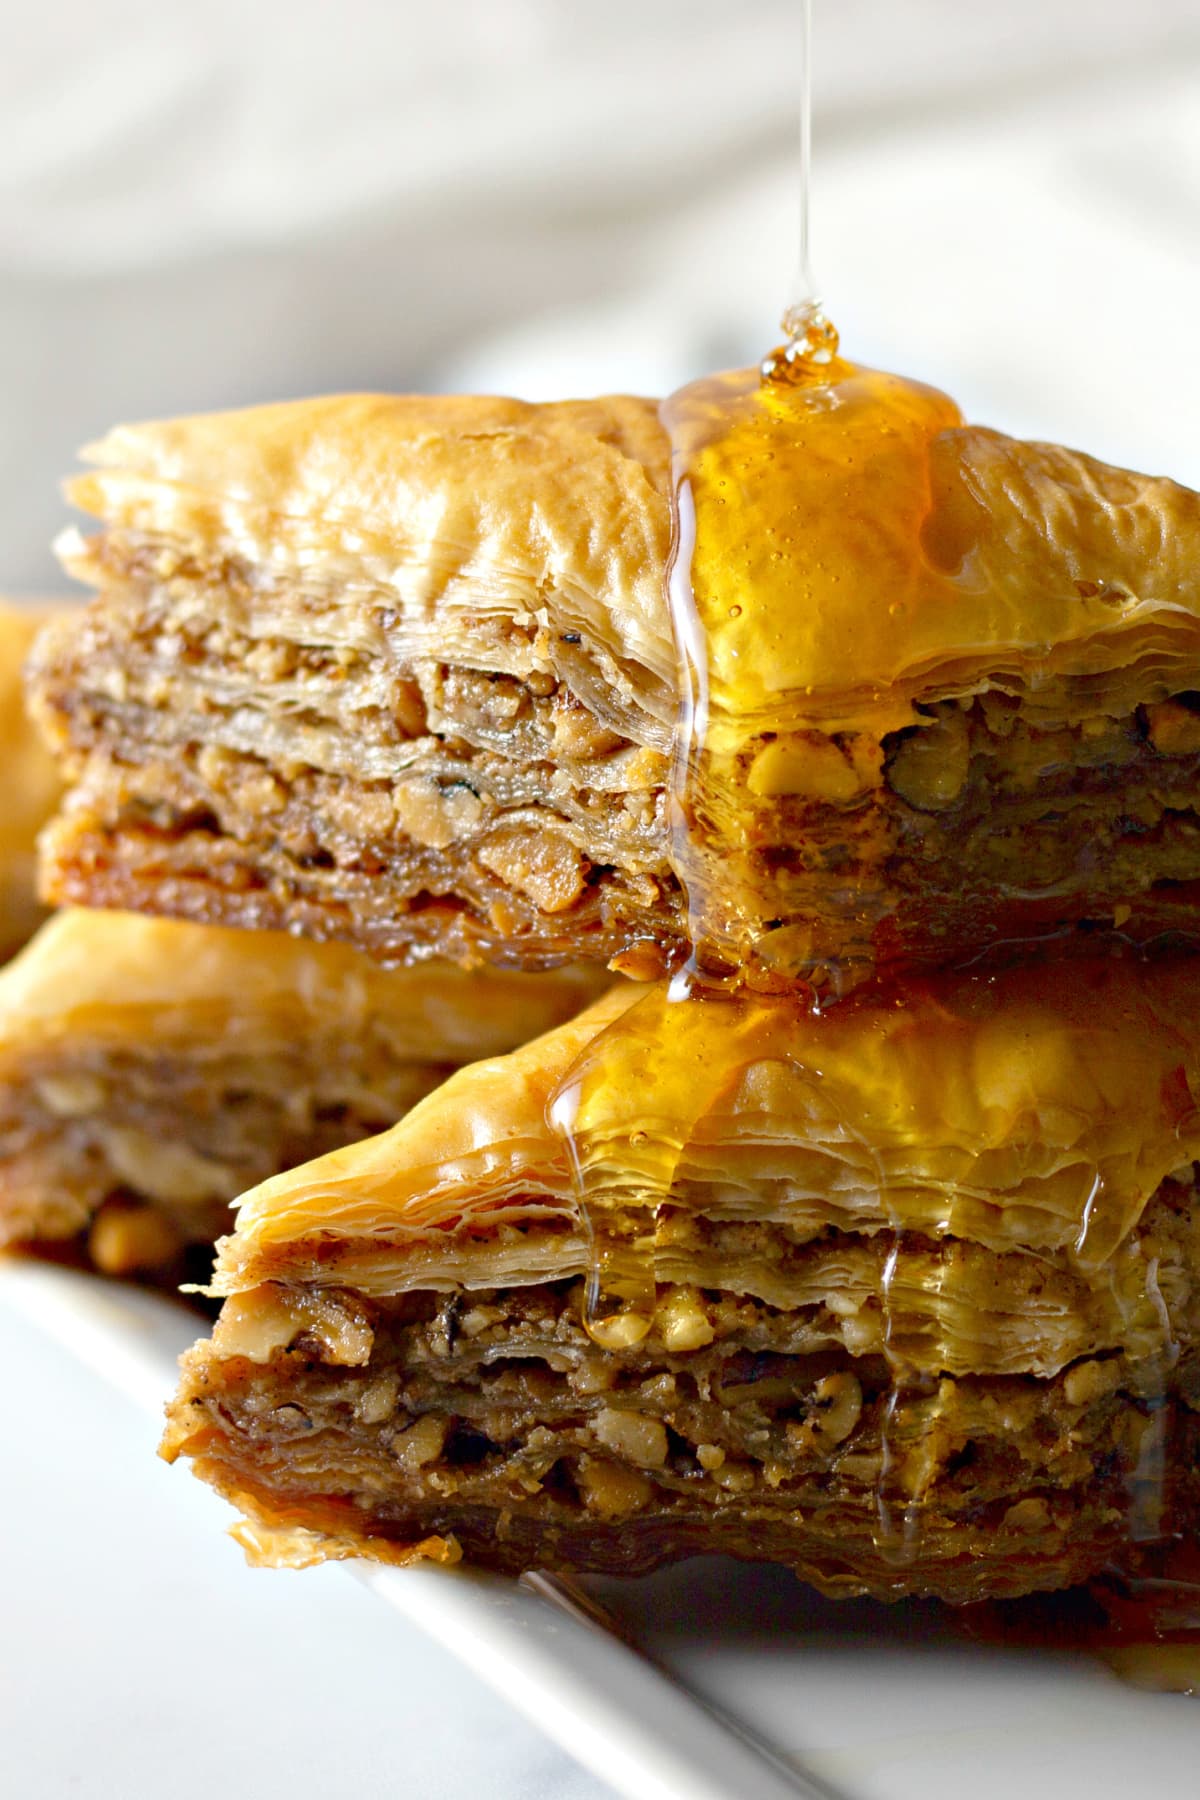 Baklava with honey drizzled on top